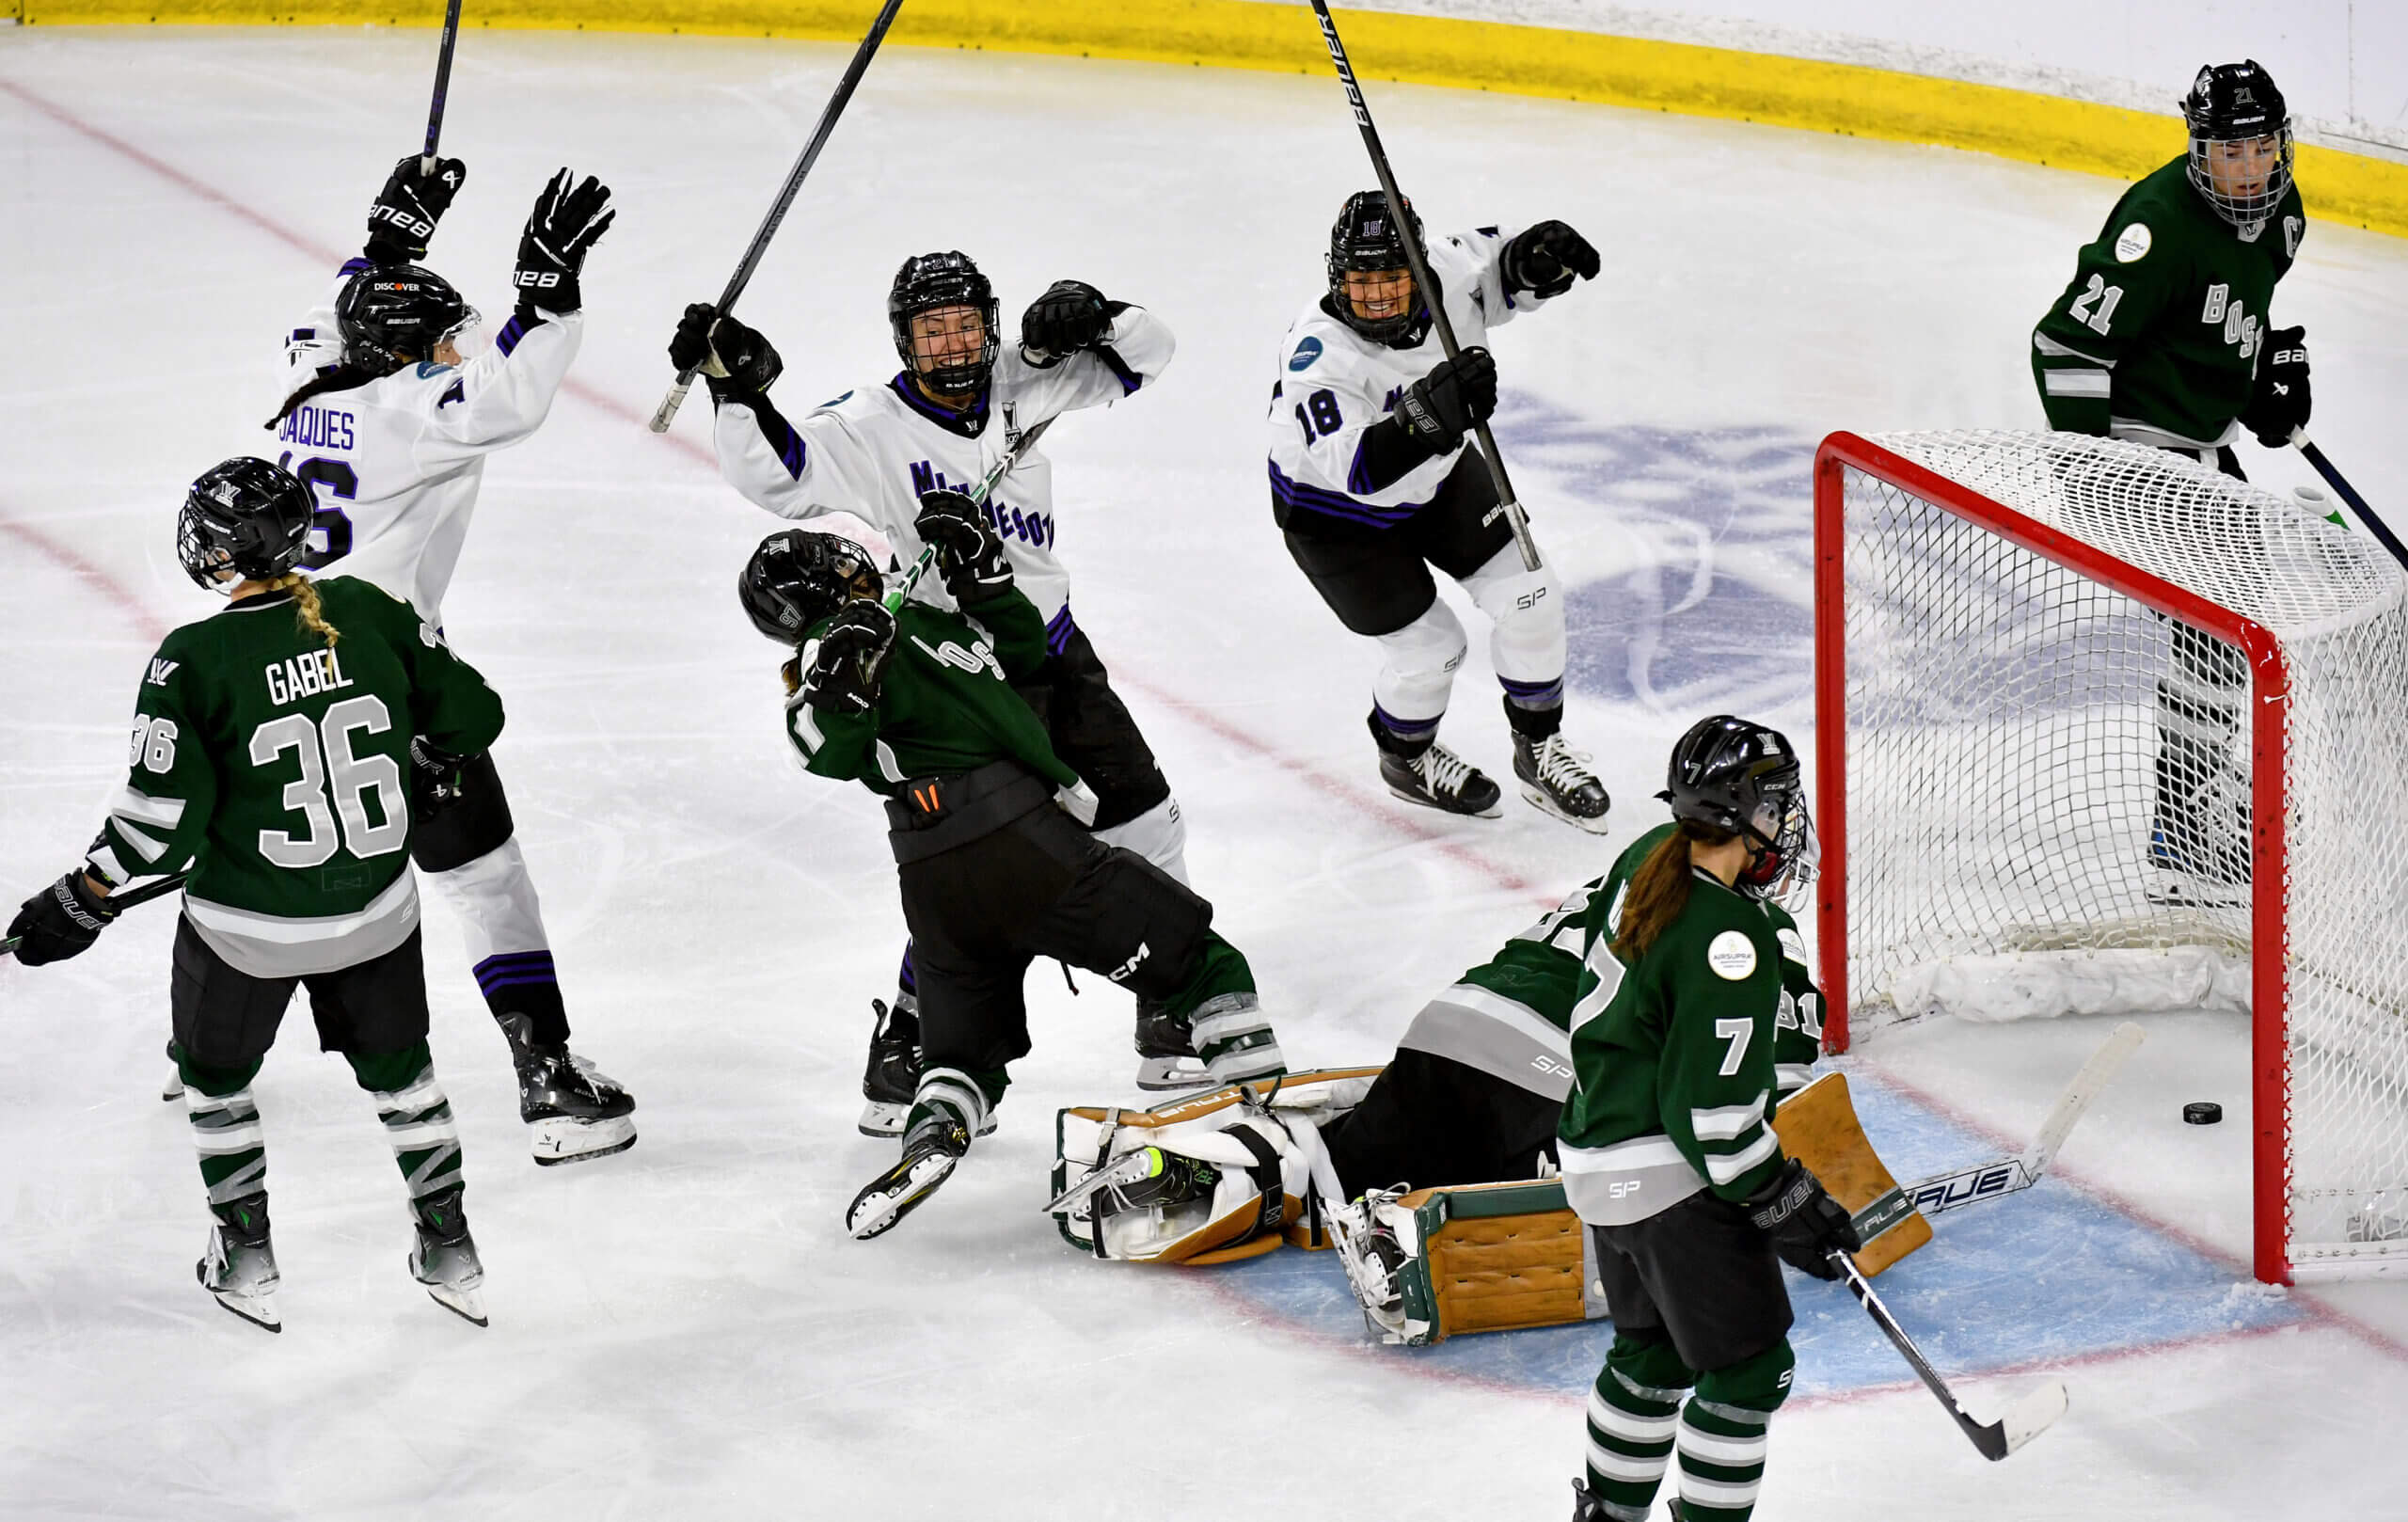 PWHL Minnesota wins first-ever Walter Cup championship